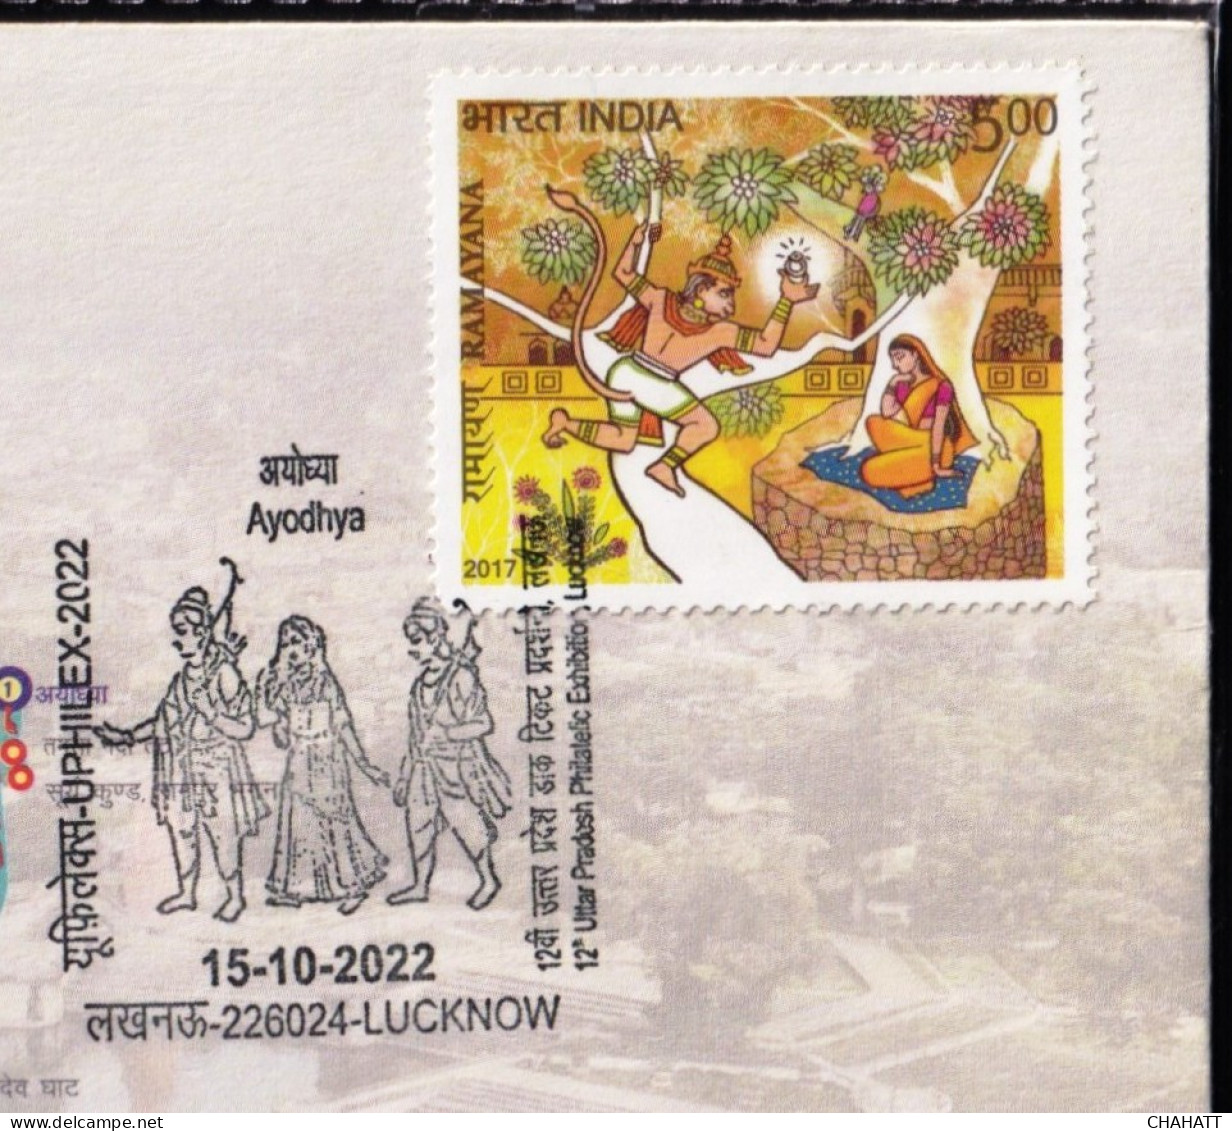 HINDUISM - RAMAYAN-  ARCHERY, AYODHYA - PICTORIAL CANCELLATION - SPECIAL COVER - INDIA -2022- BX4-23 - Hinduism